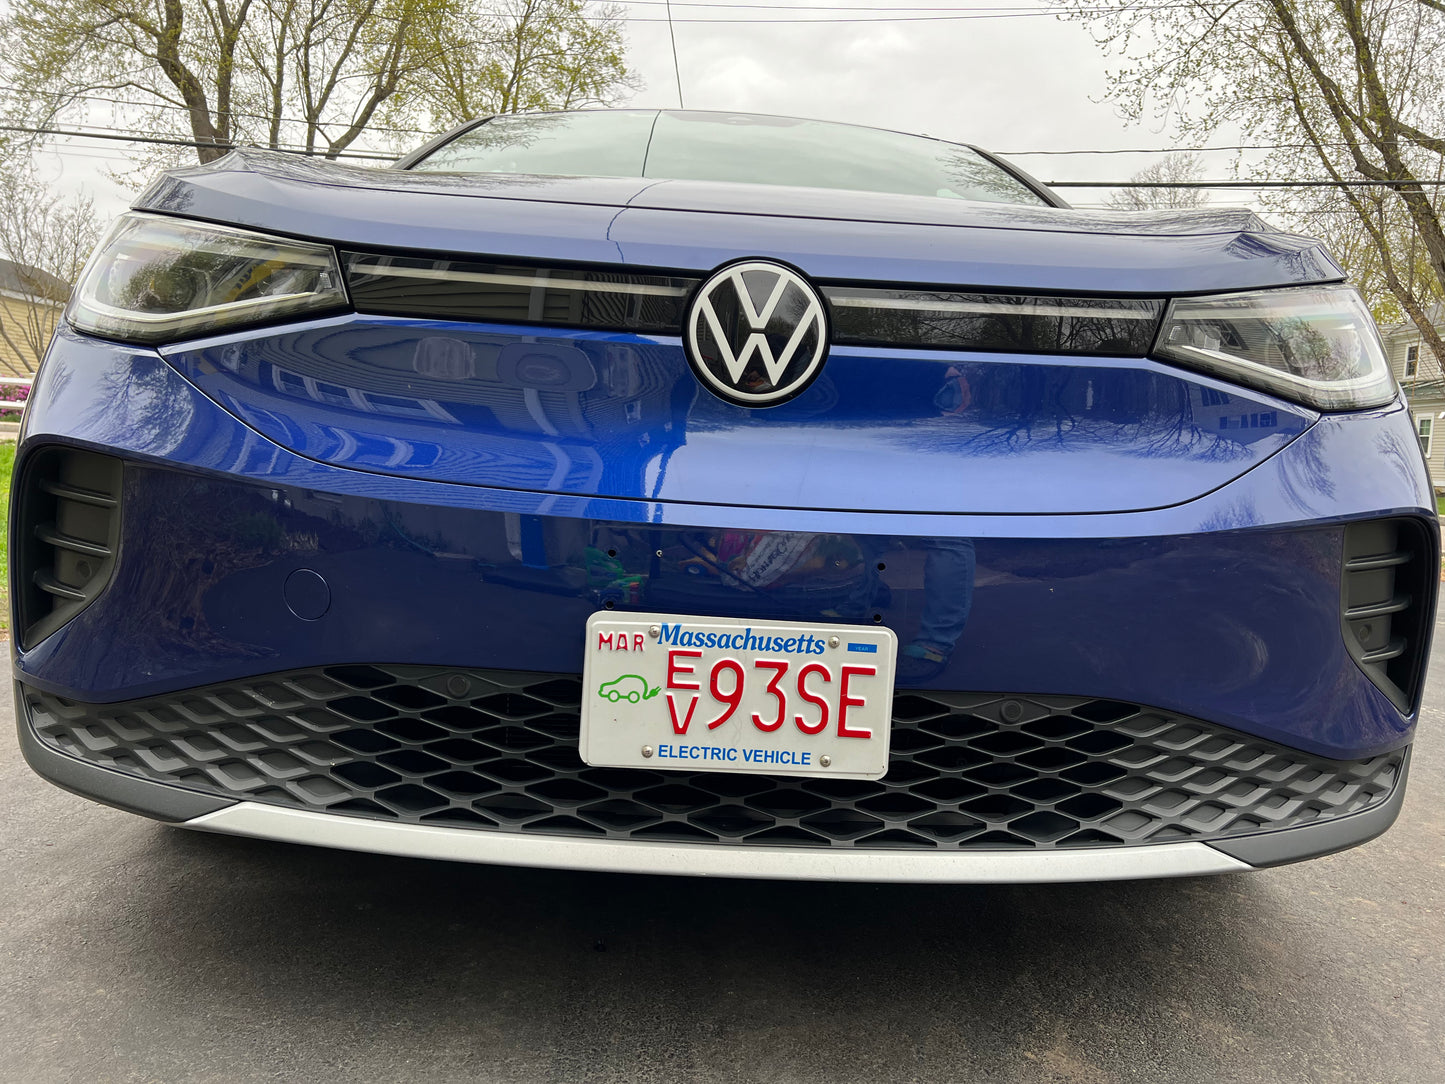 No drilling license plate mounting bracket for Volkswagen VW ID.4. Must have if you want to prevent drilling holes in front bumper. Improves the look of your ID.4. ID.4 must have mod.